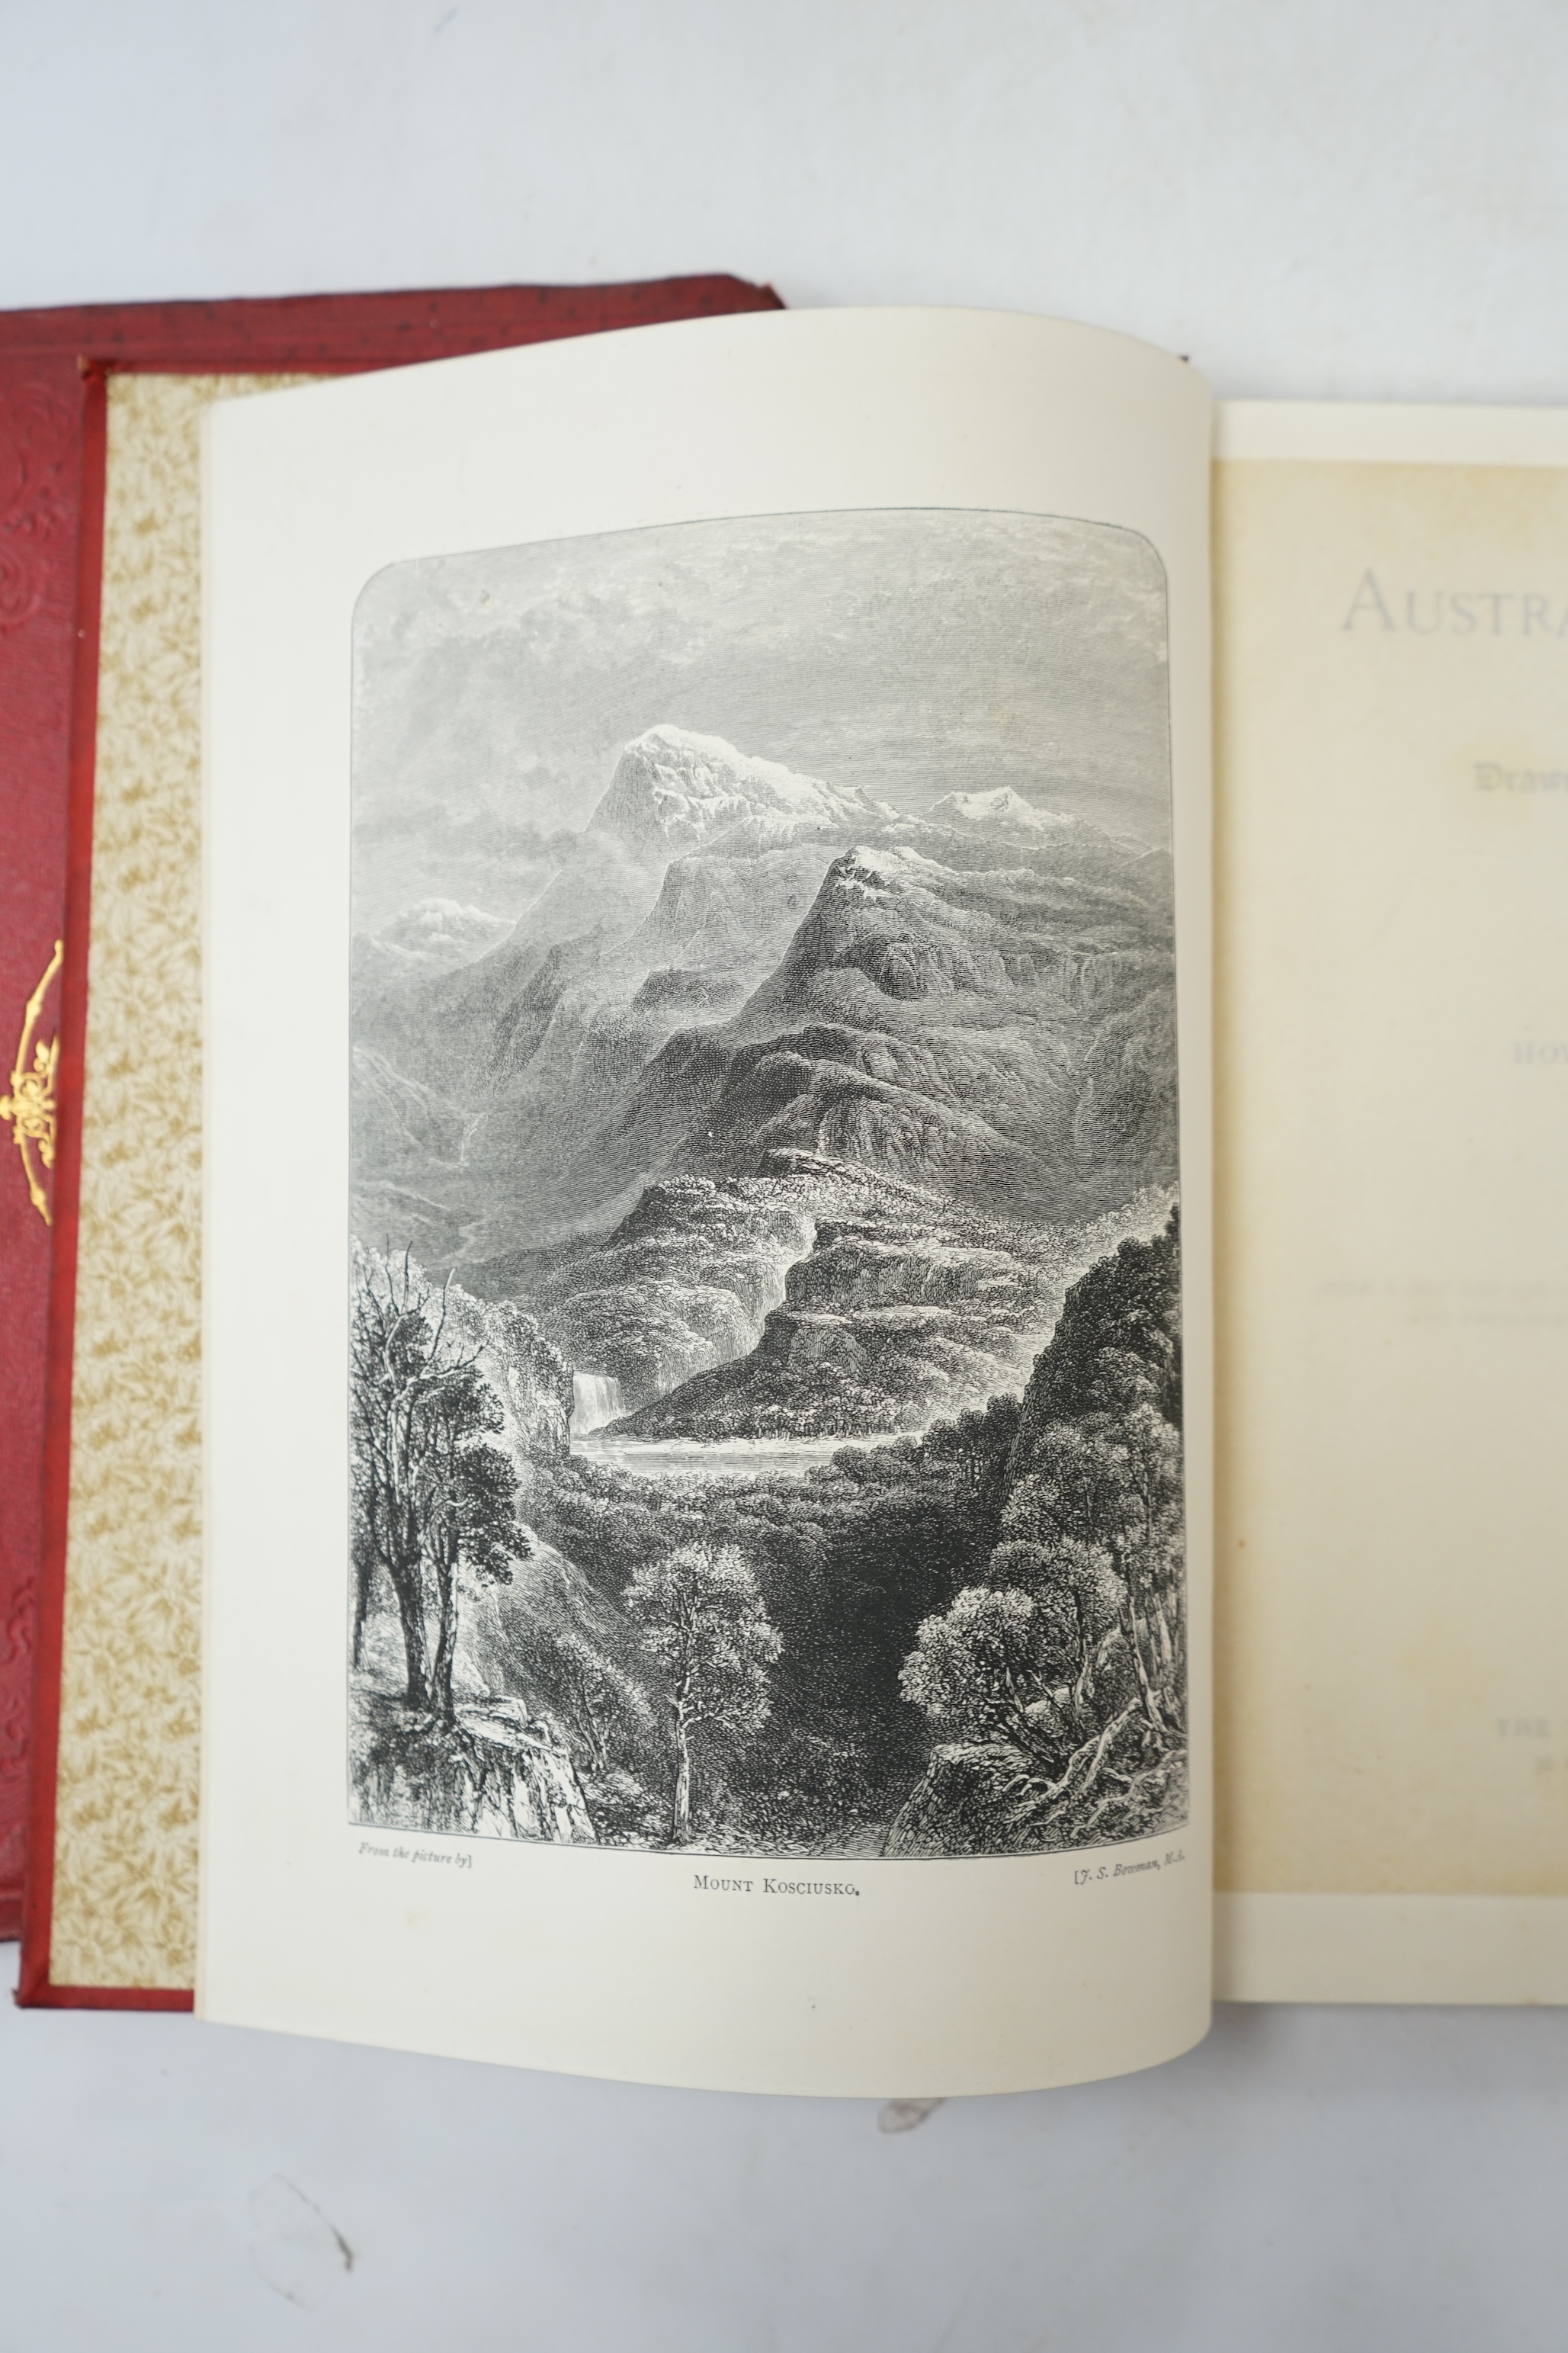 Martin, Robert Montgomery - The British Colonies, Australia. c.1855. original gilt red cloth. Album of Tasmanian Views. Hardback with gilt title to the front cover, no date but circa 1900. Published in Hobart by J Walch